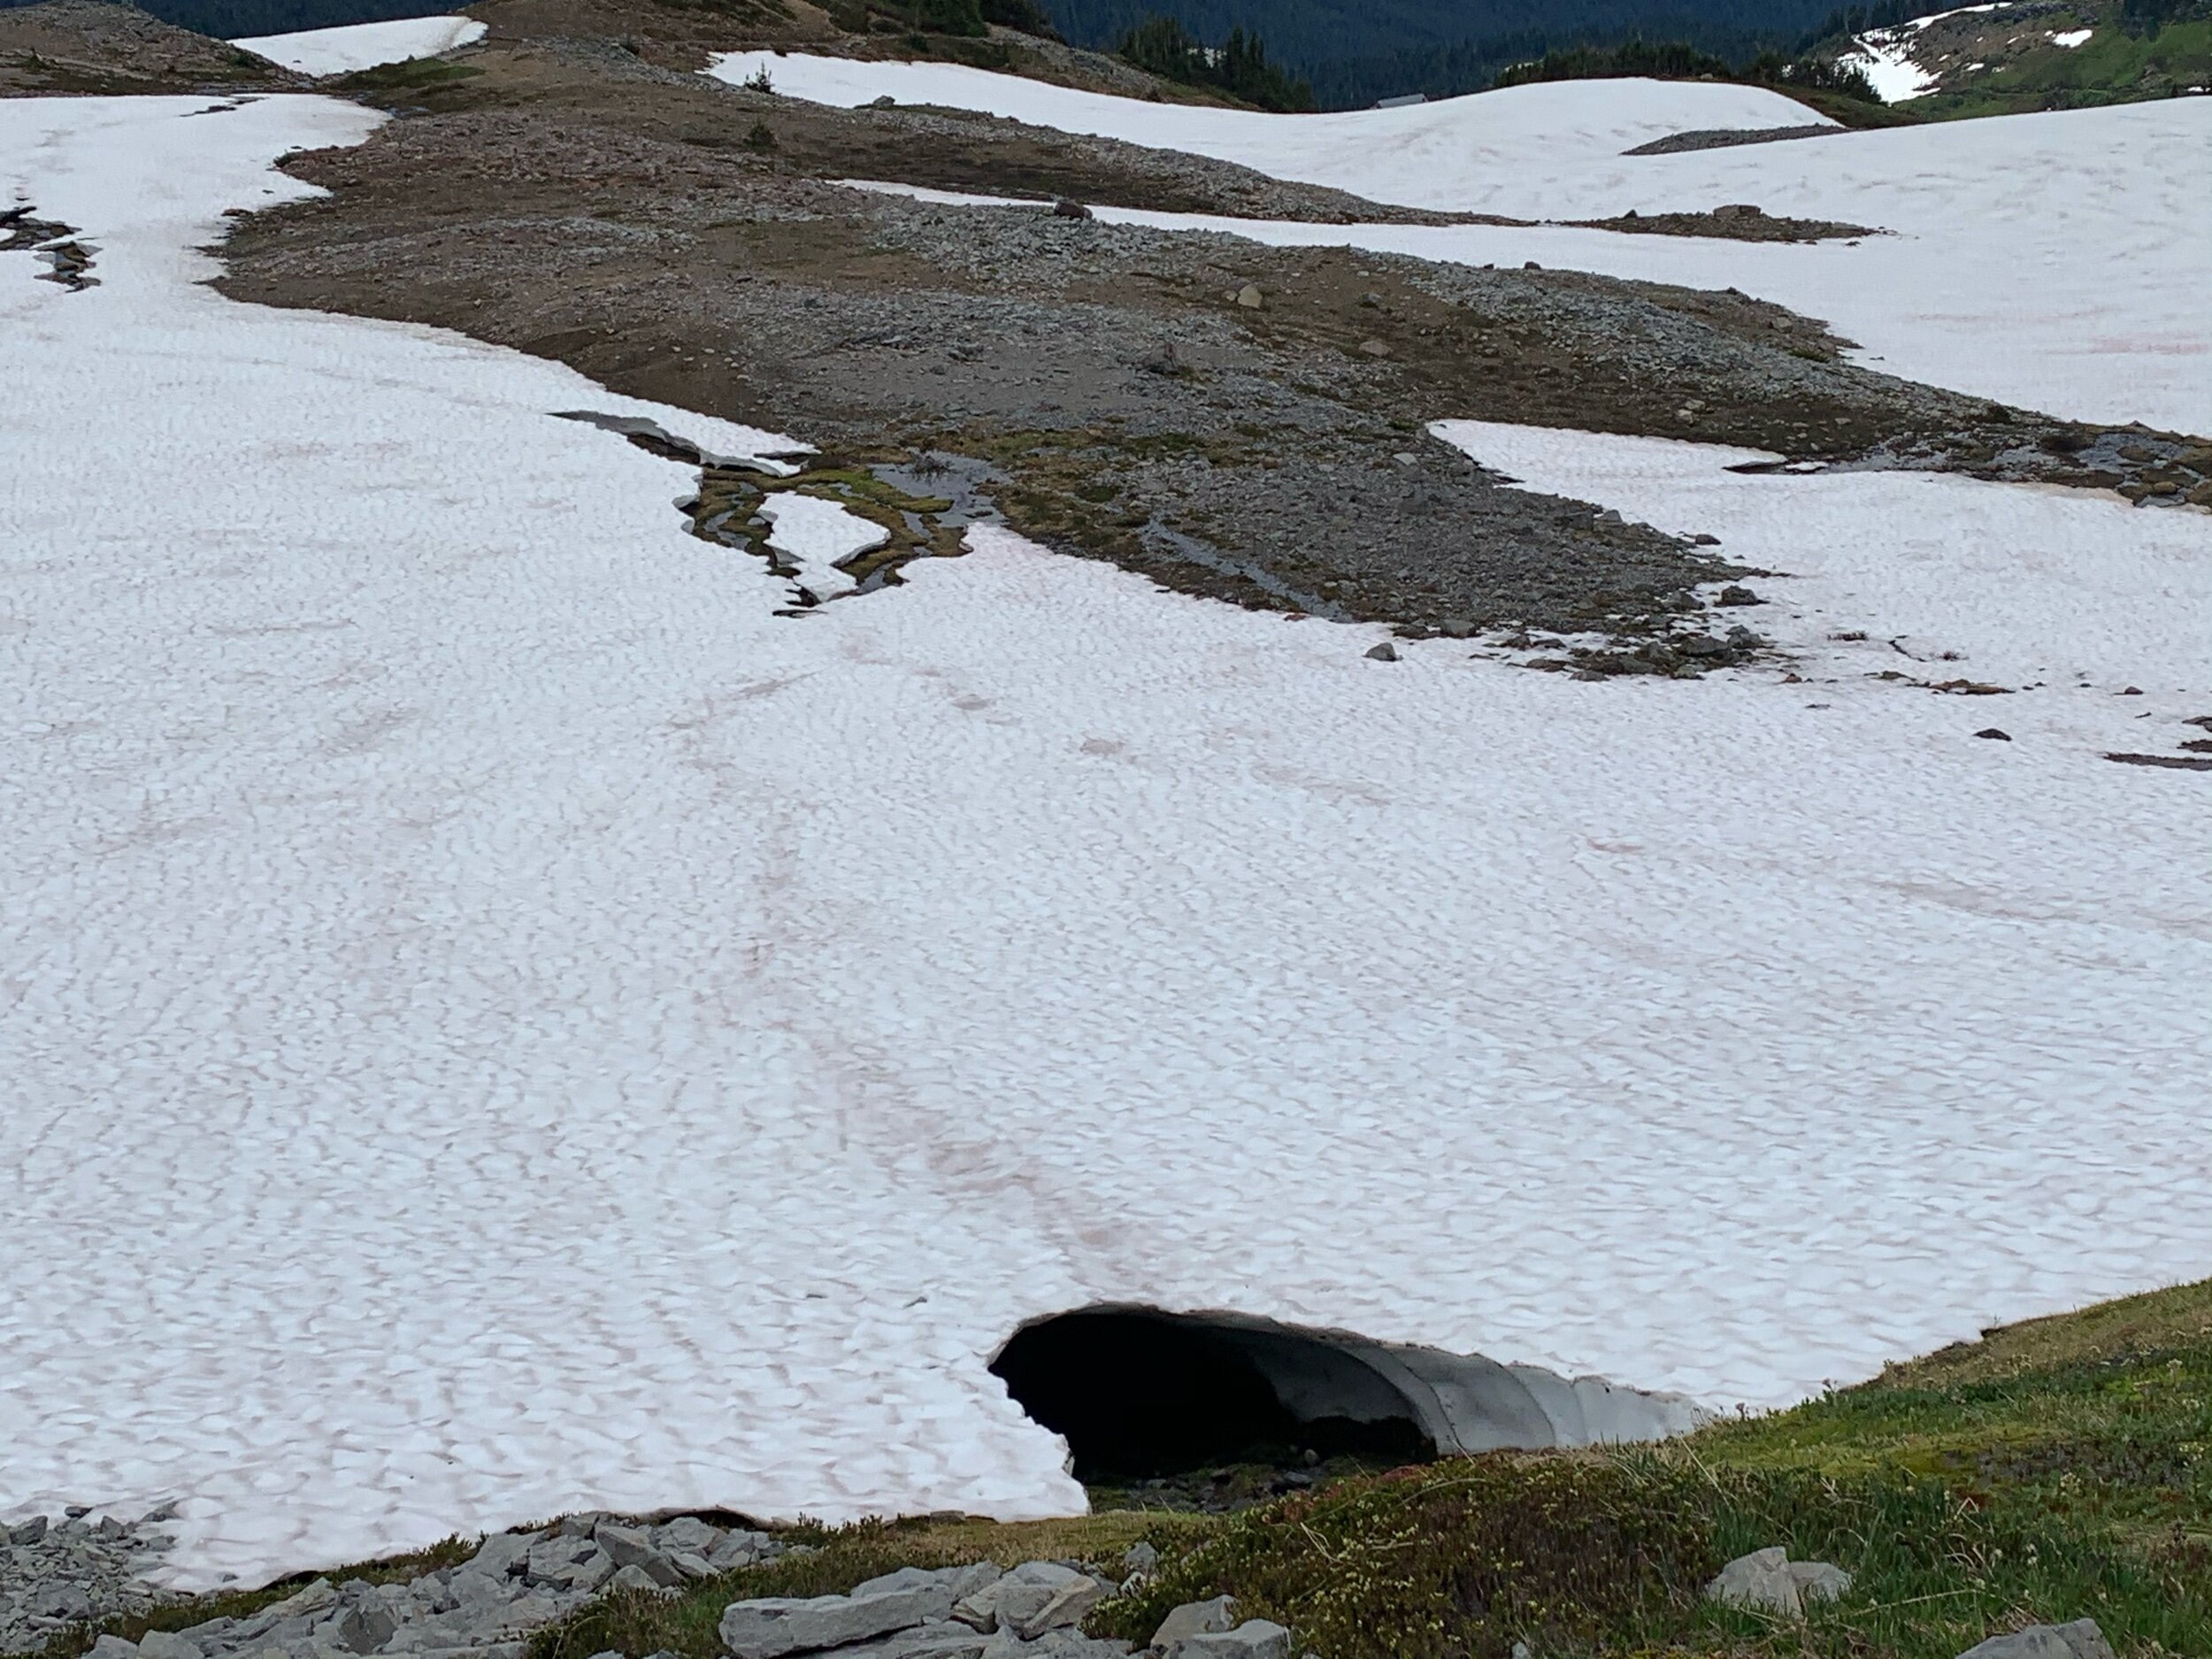  This tunnel is larger and more dangerous than it looks. The dark lines in the snow indicate hollowed out tunnels where melting snow causes water and debris to rush downstream. Two people died at Mt. Rainier this week, one of which was witnessed step